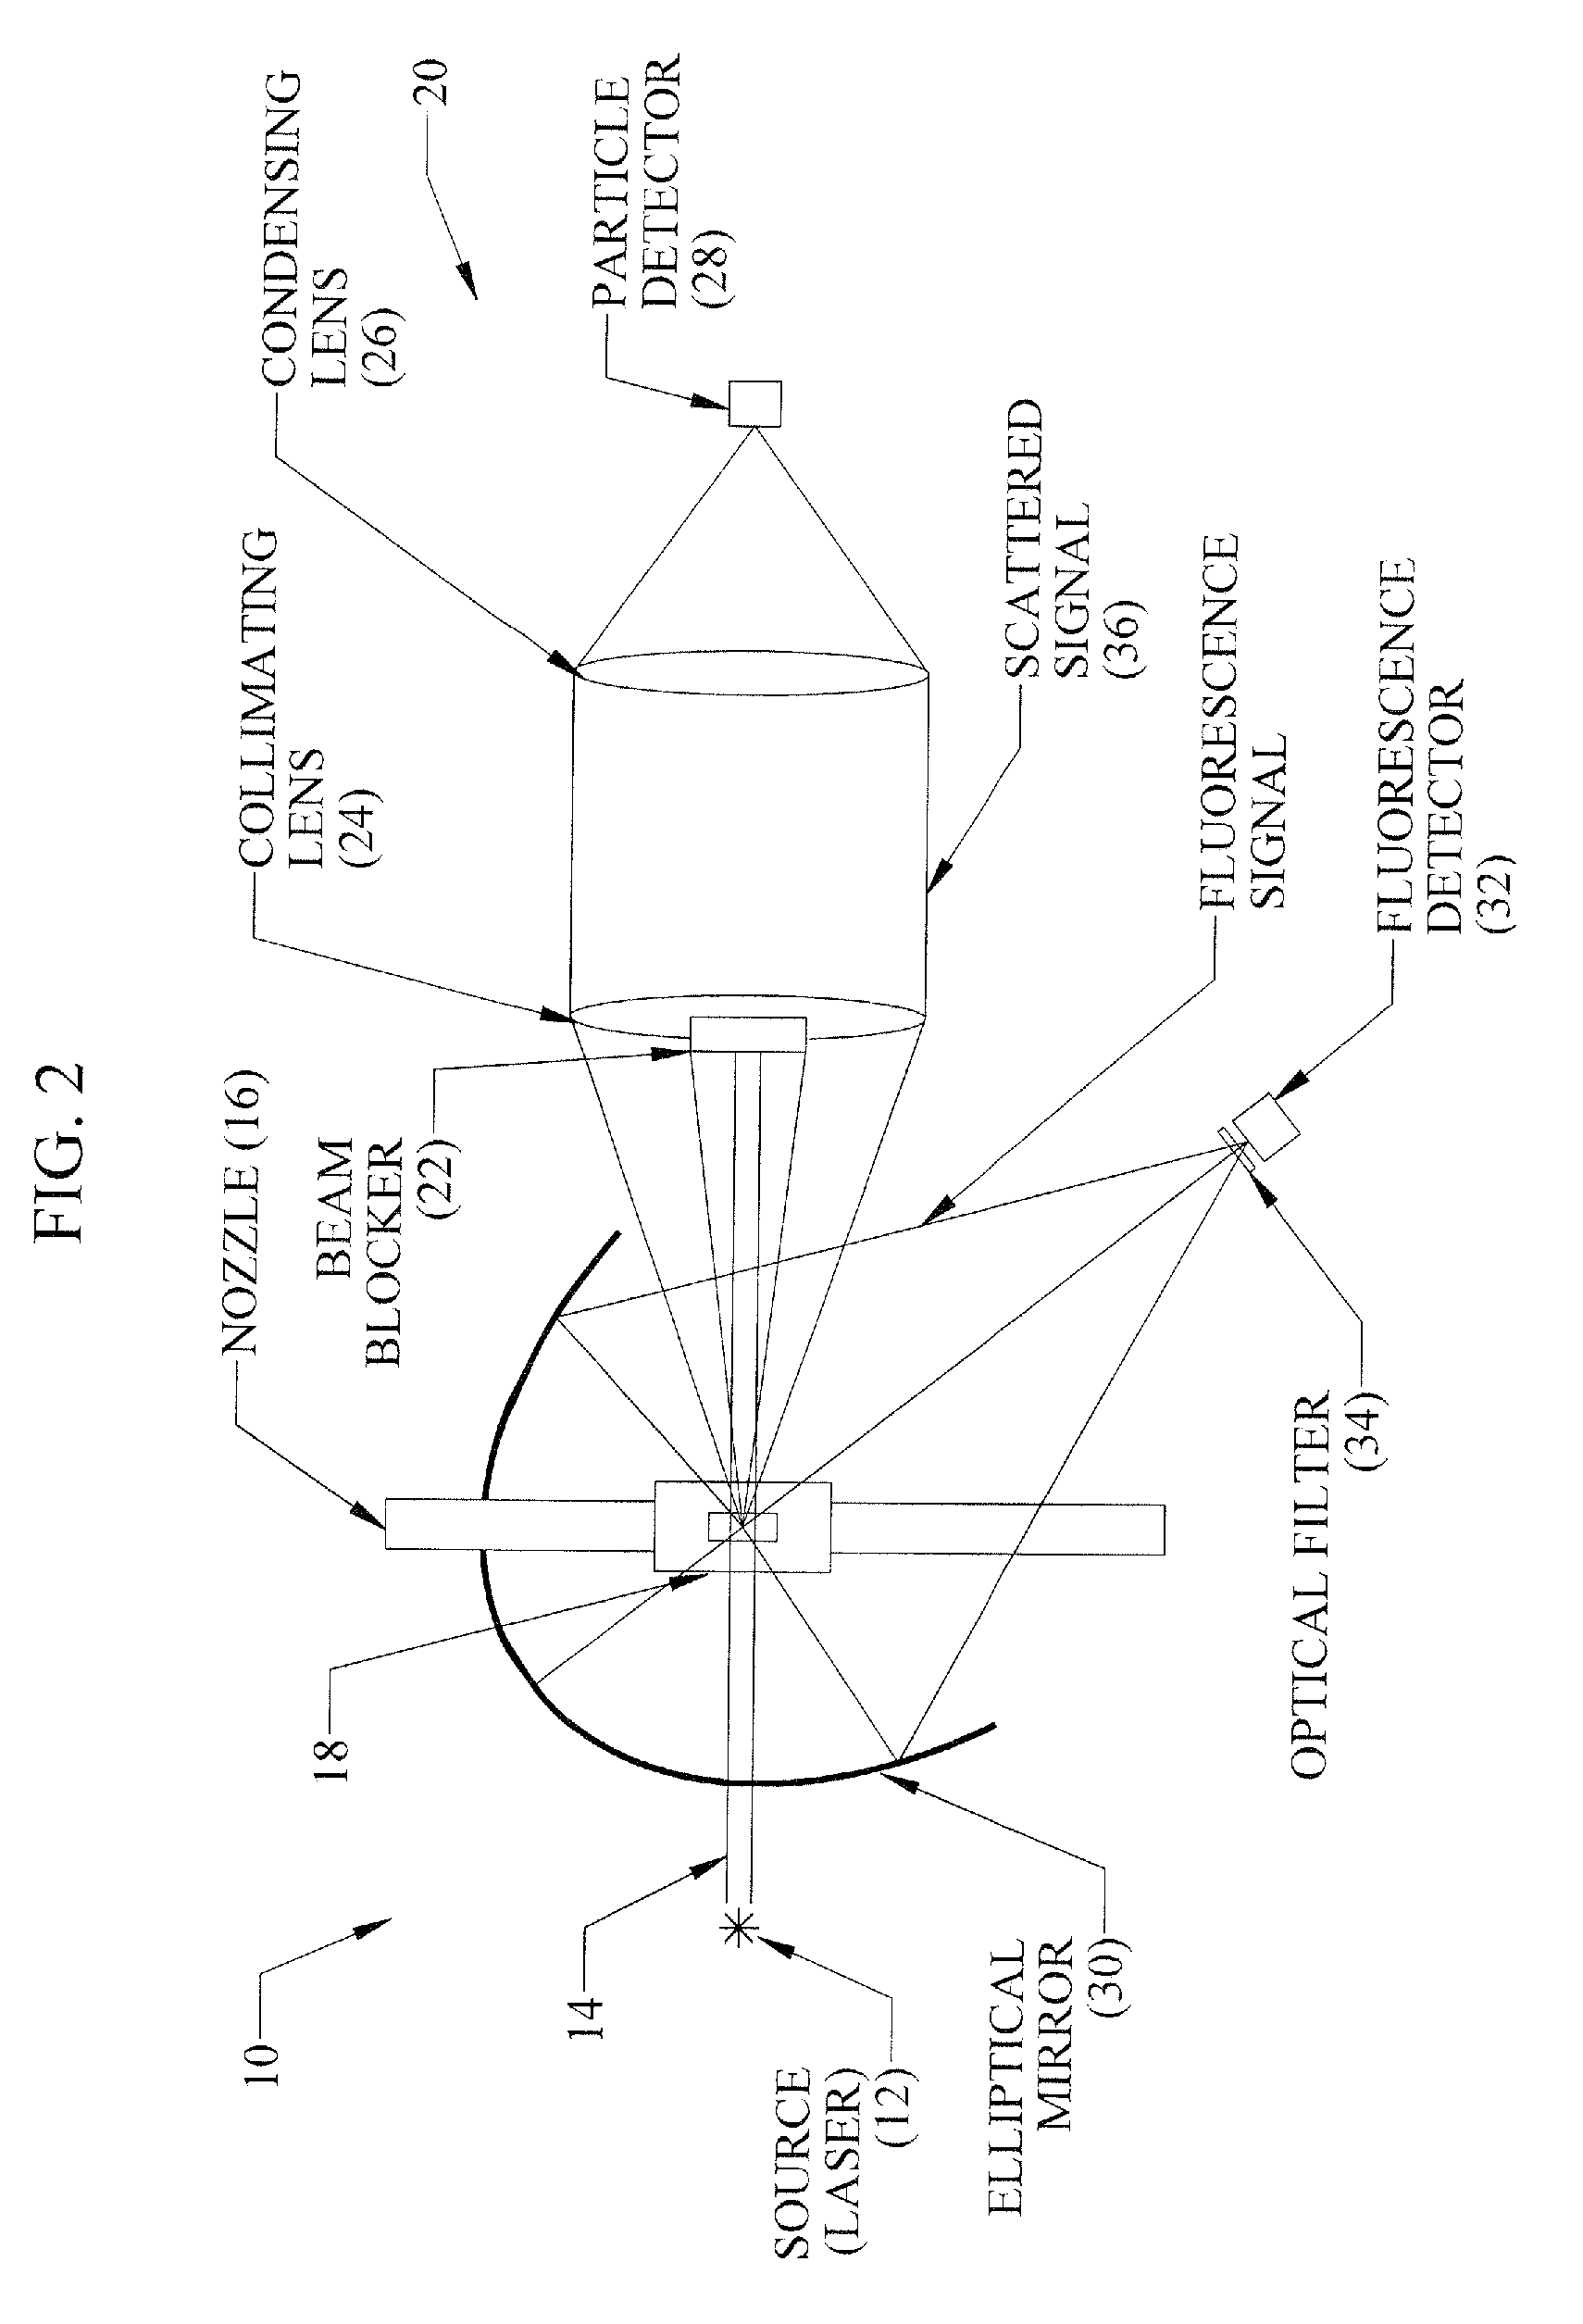 Method for the detection of biologic particle contamination